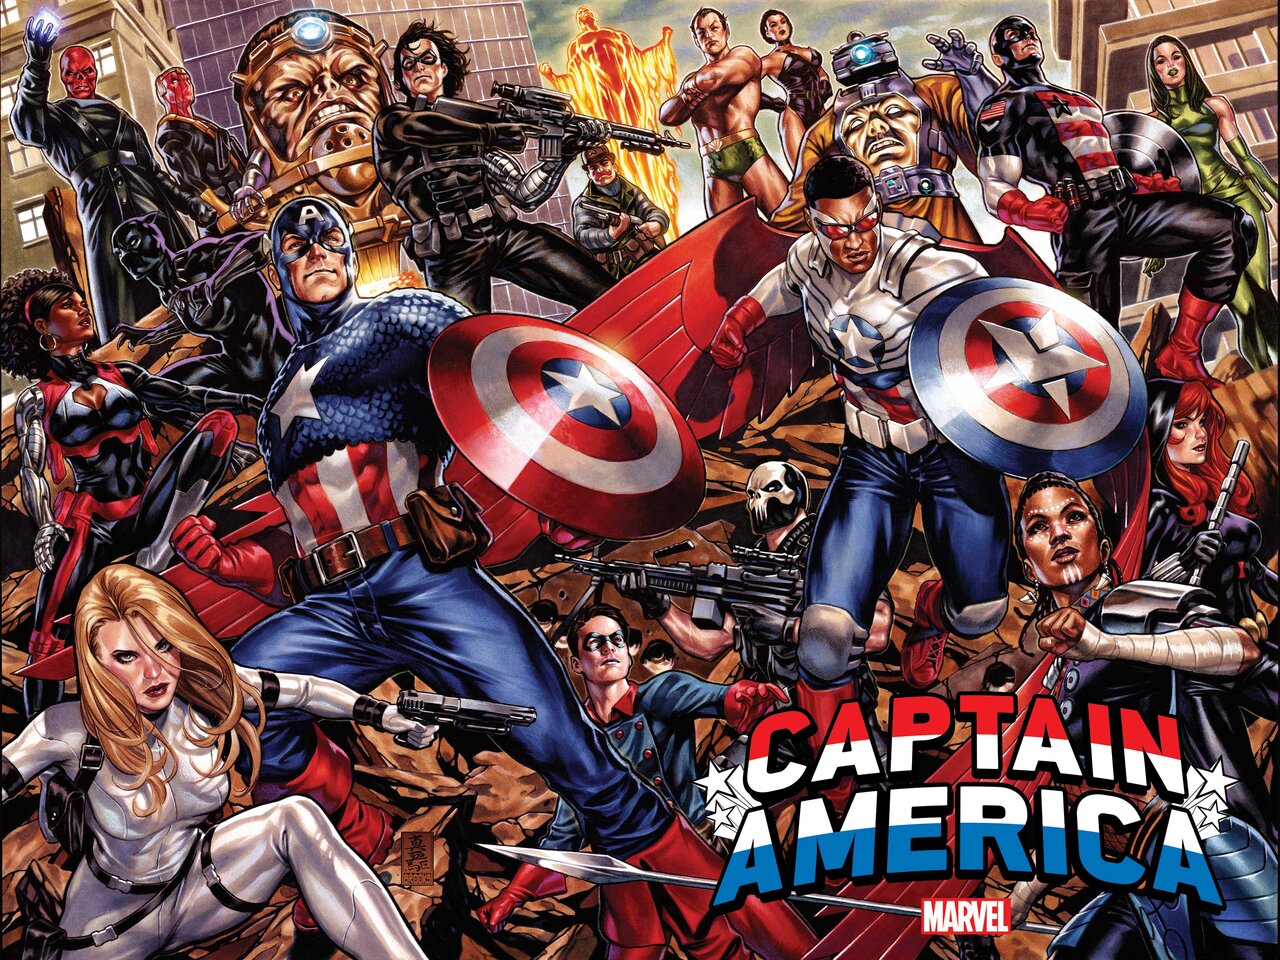 Captain America #0 will serve as springboard for 2 series